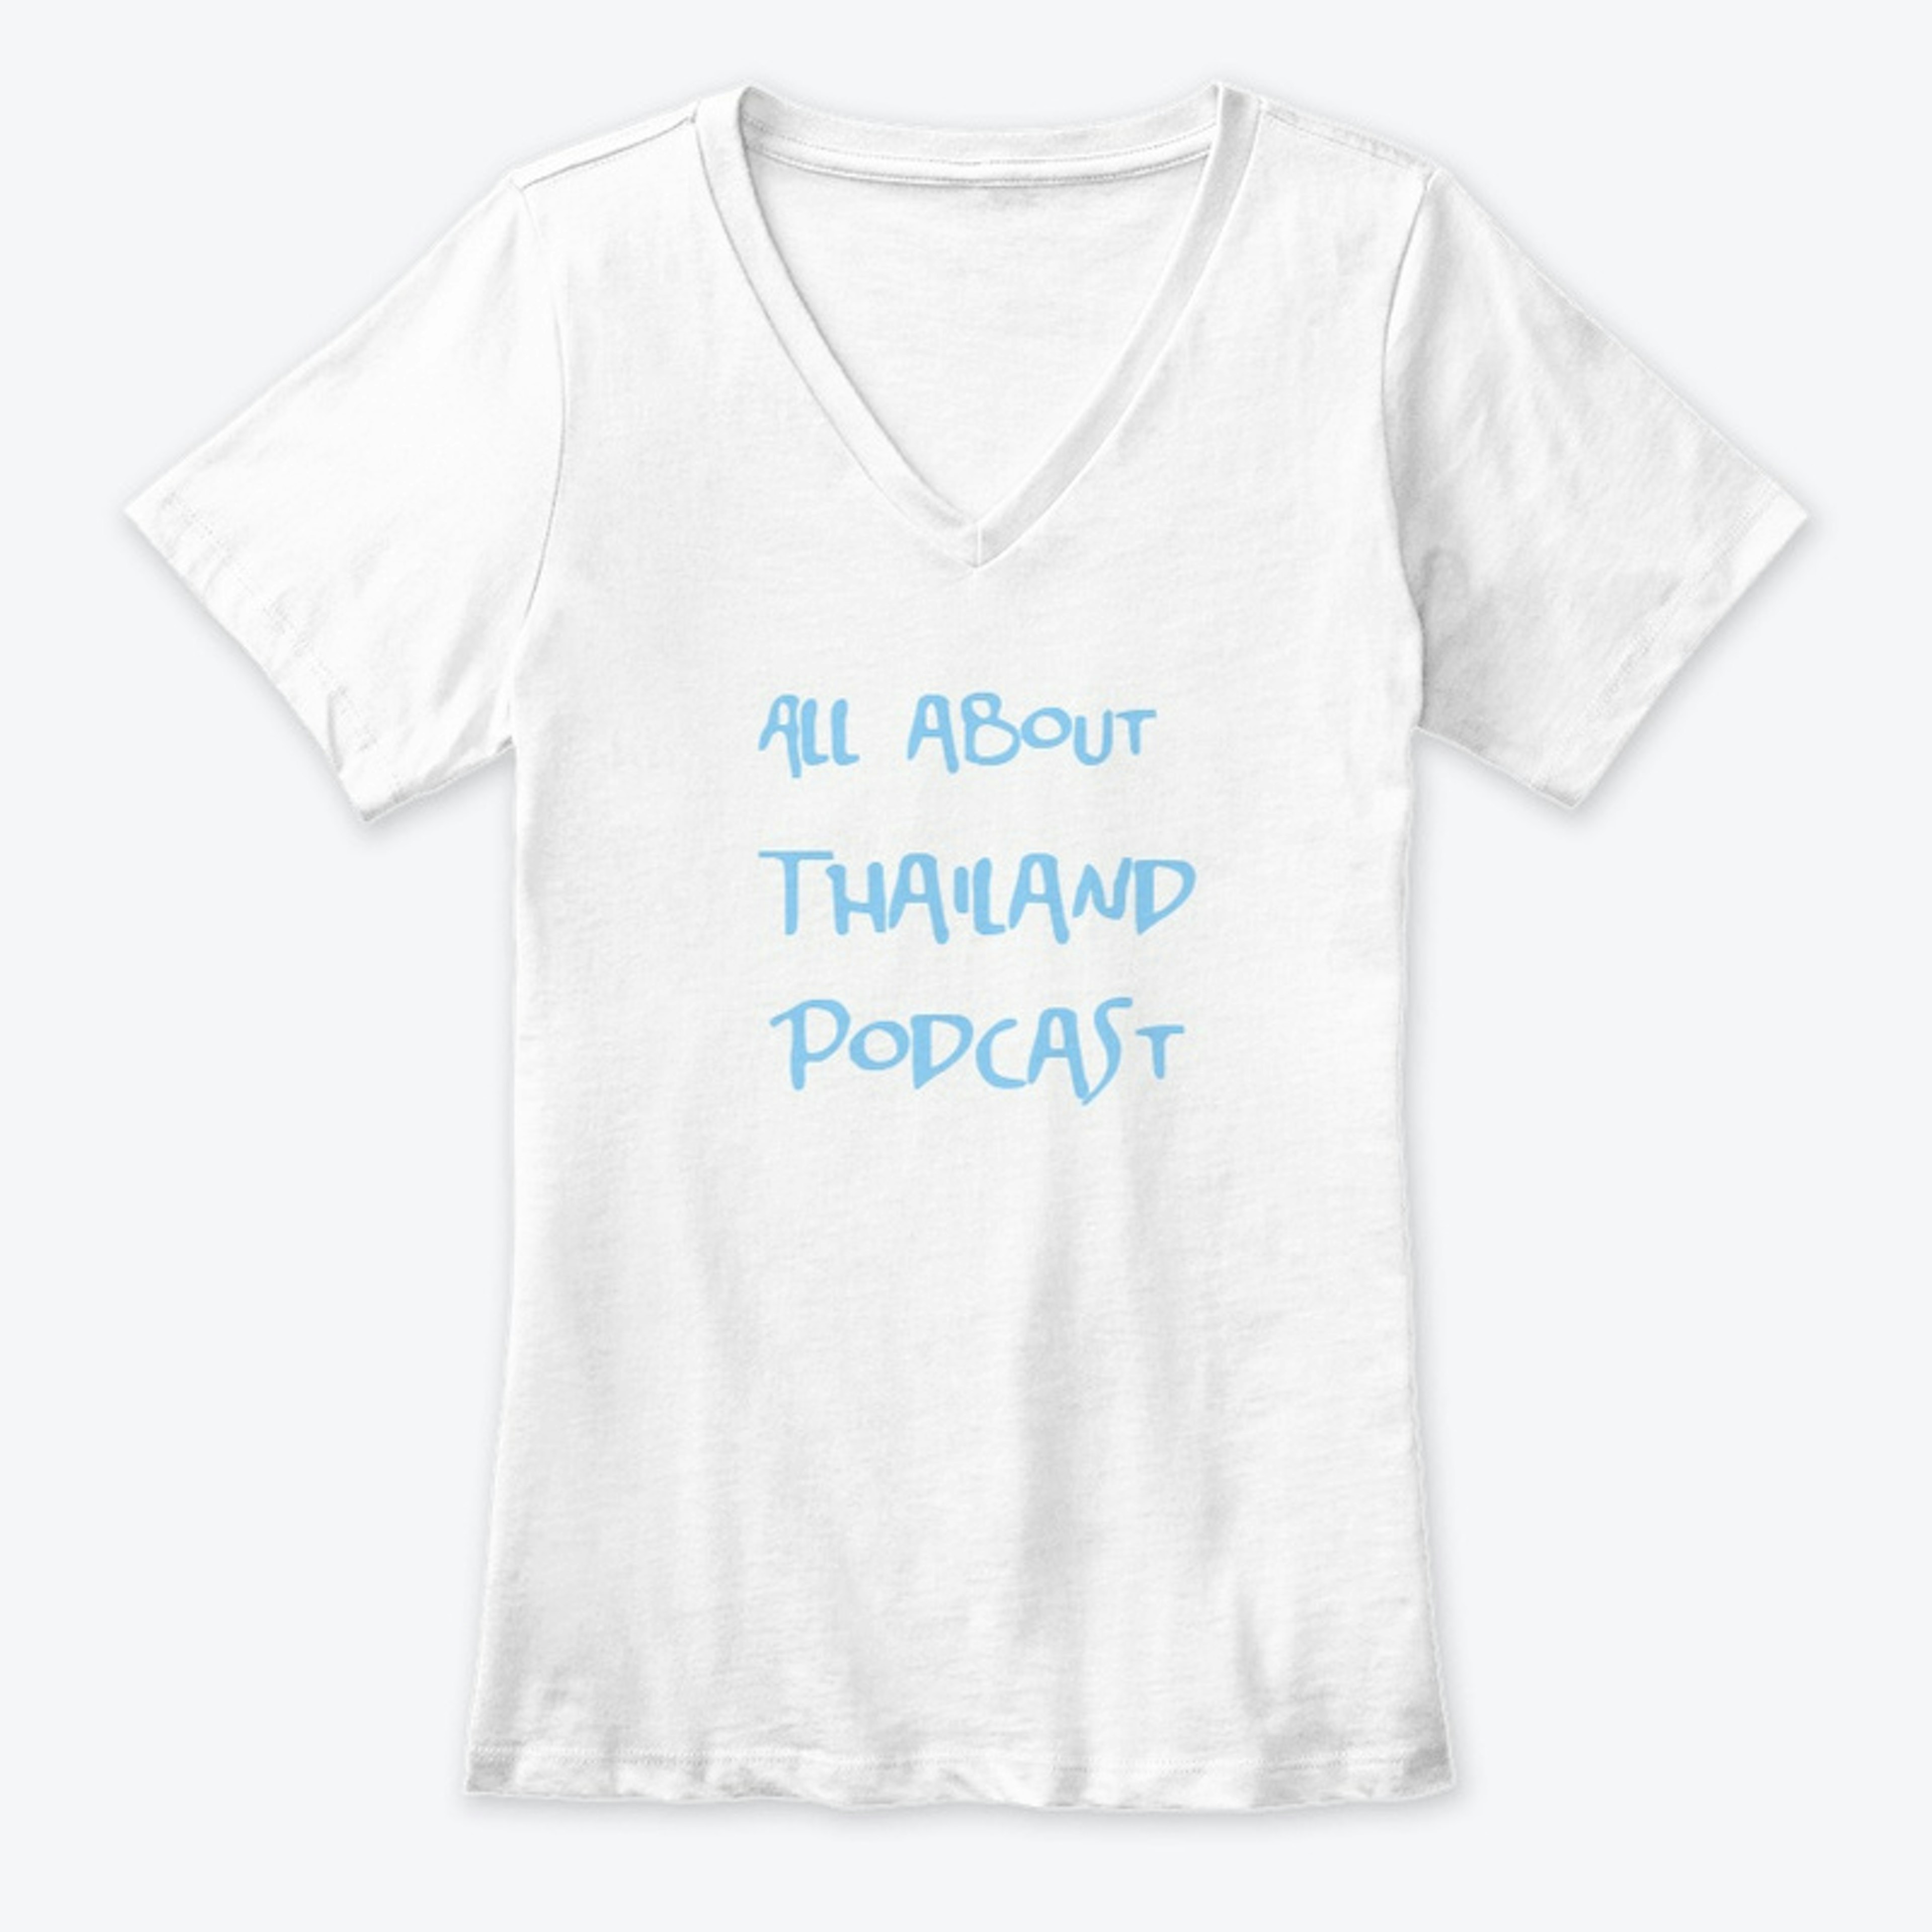 All about Thailand